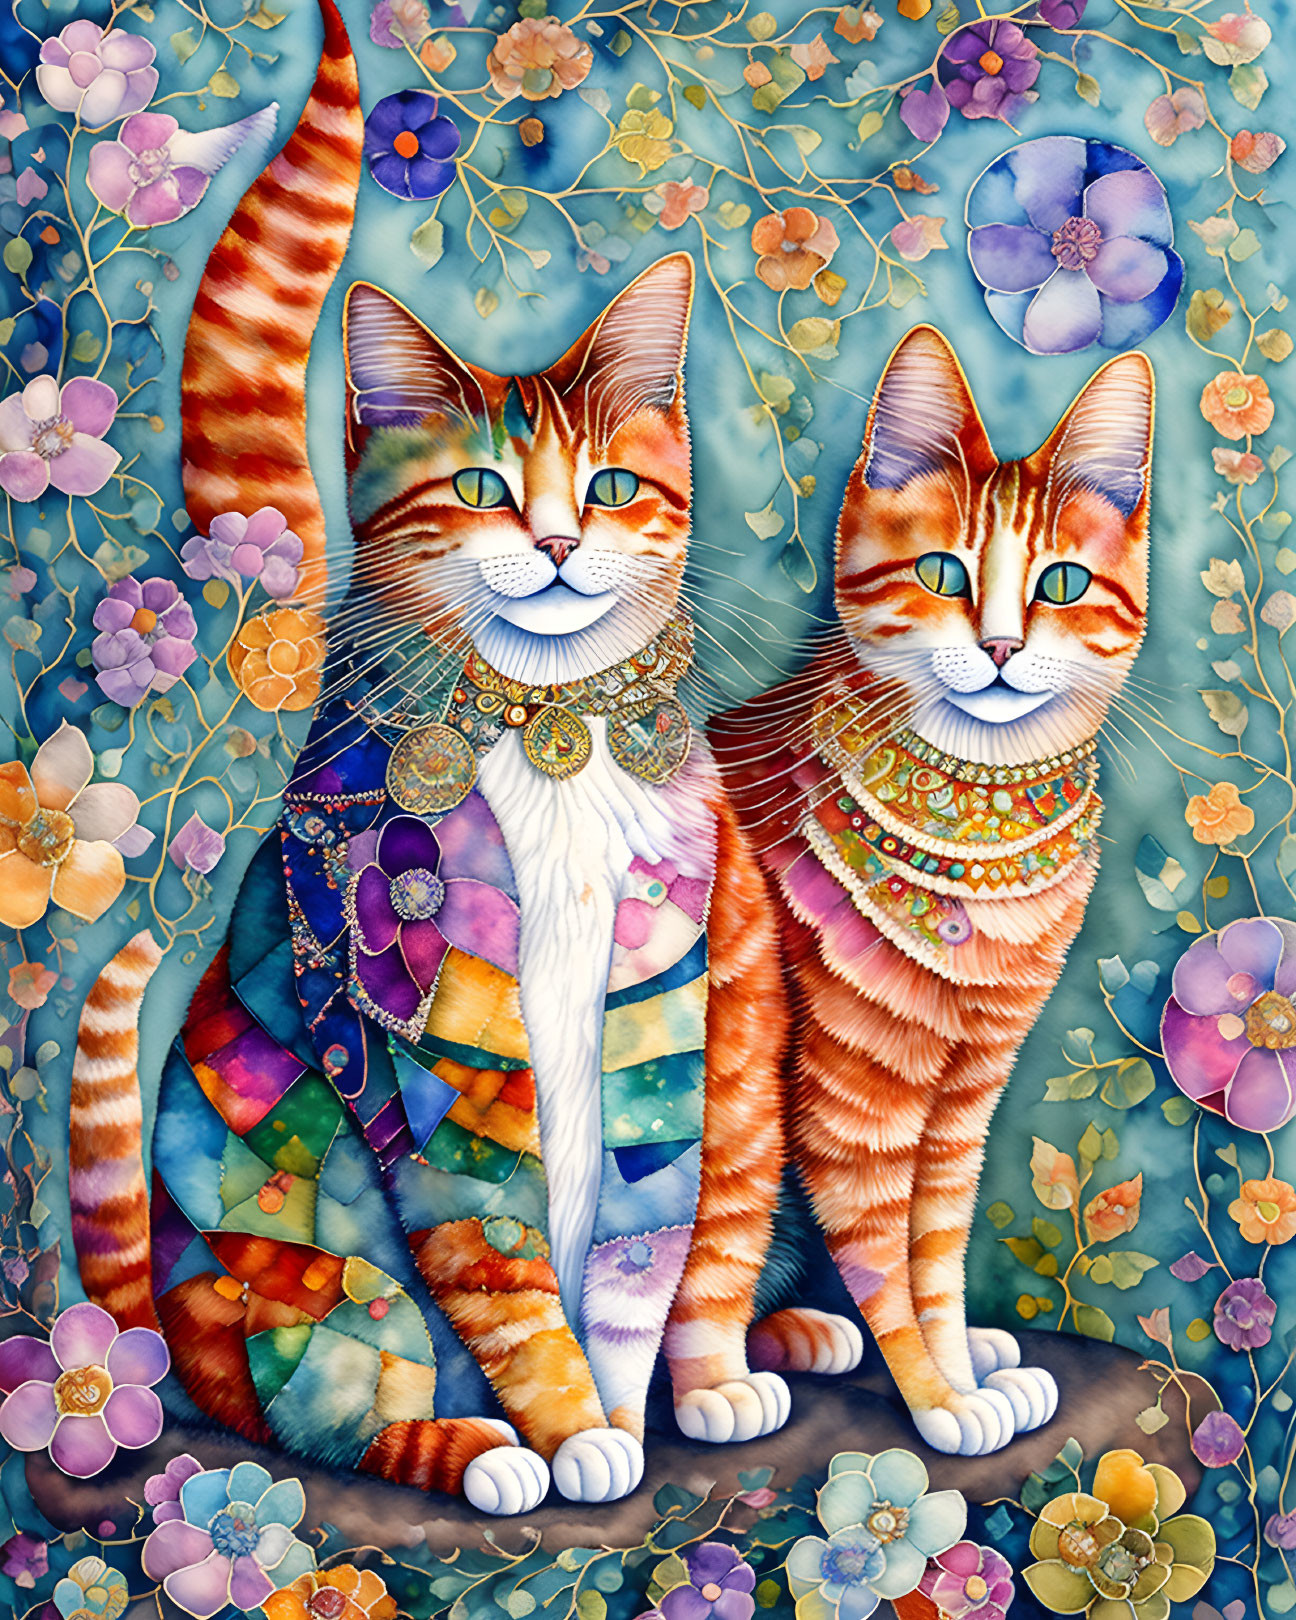 Ginger cat, patchwork art by Louis Wain and by Pau